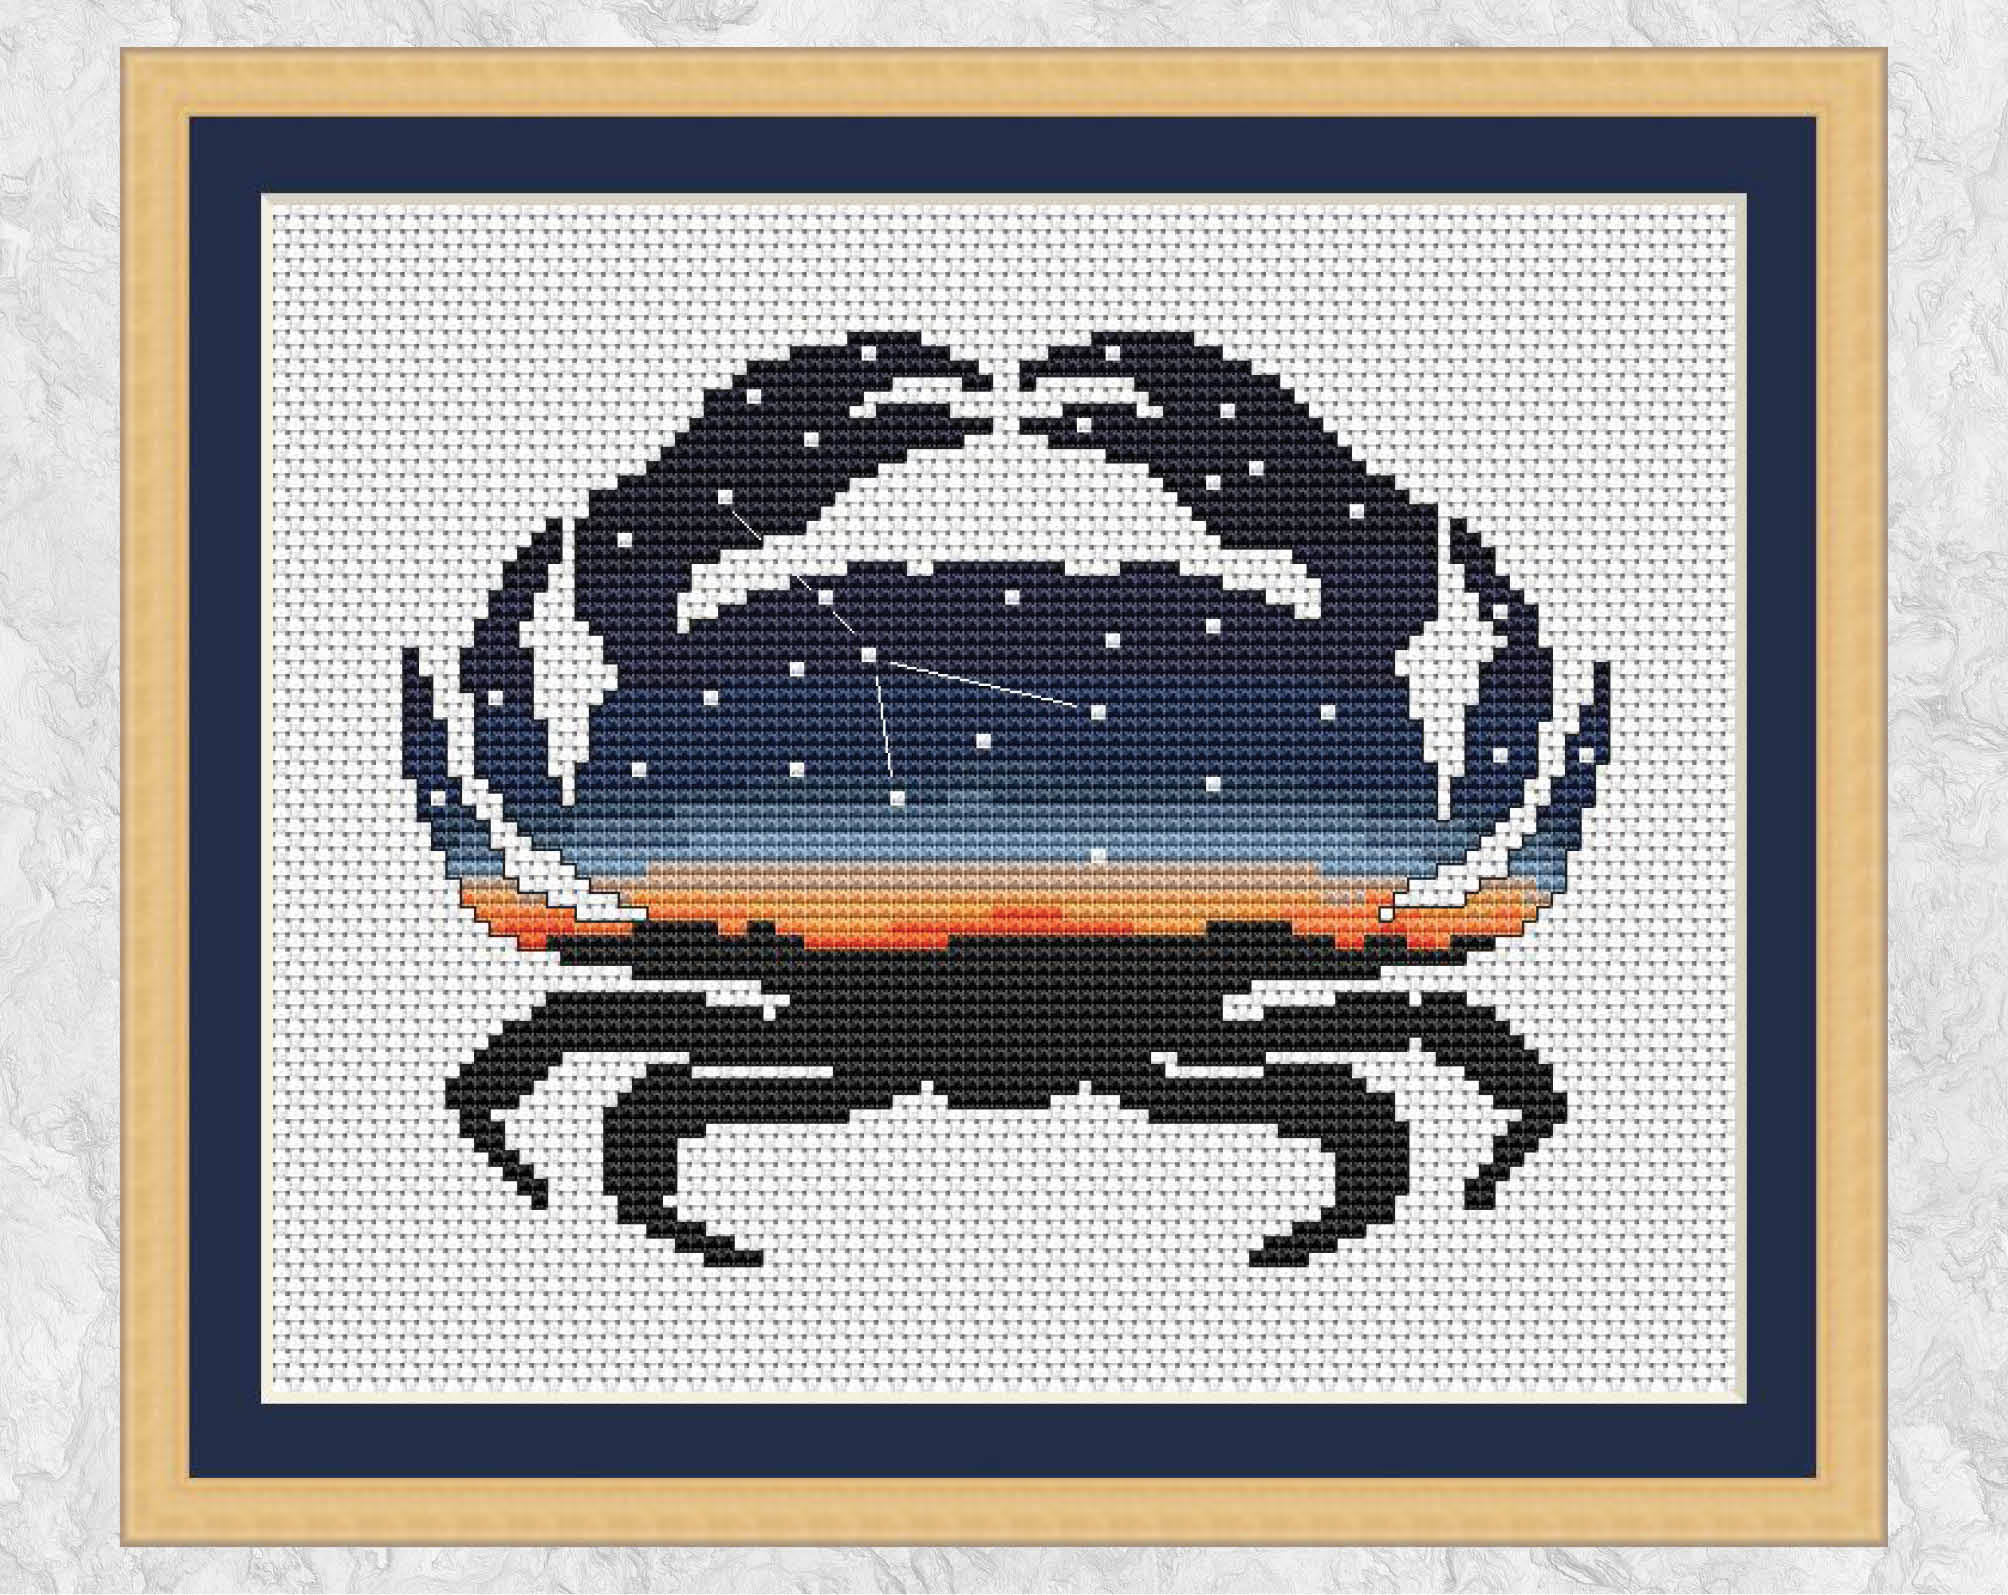 Cross stitch pattern of a crab silhouette filled with the zodiac constellation of Cancer against an evening sky. With frame.